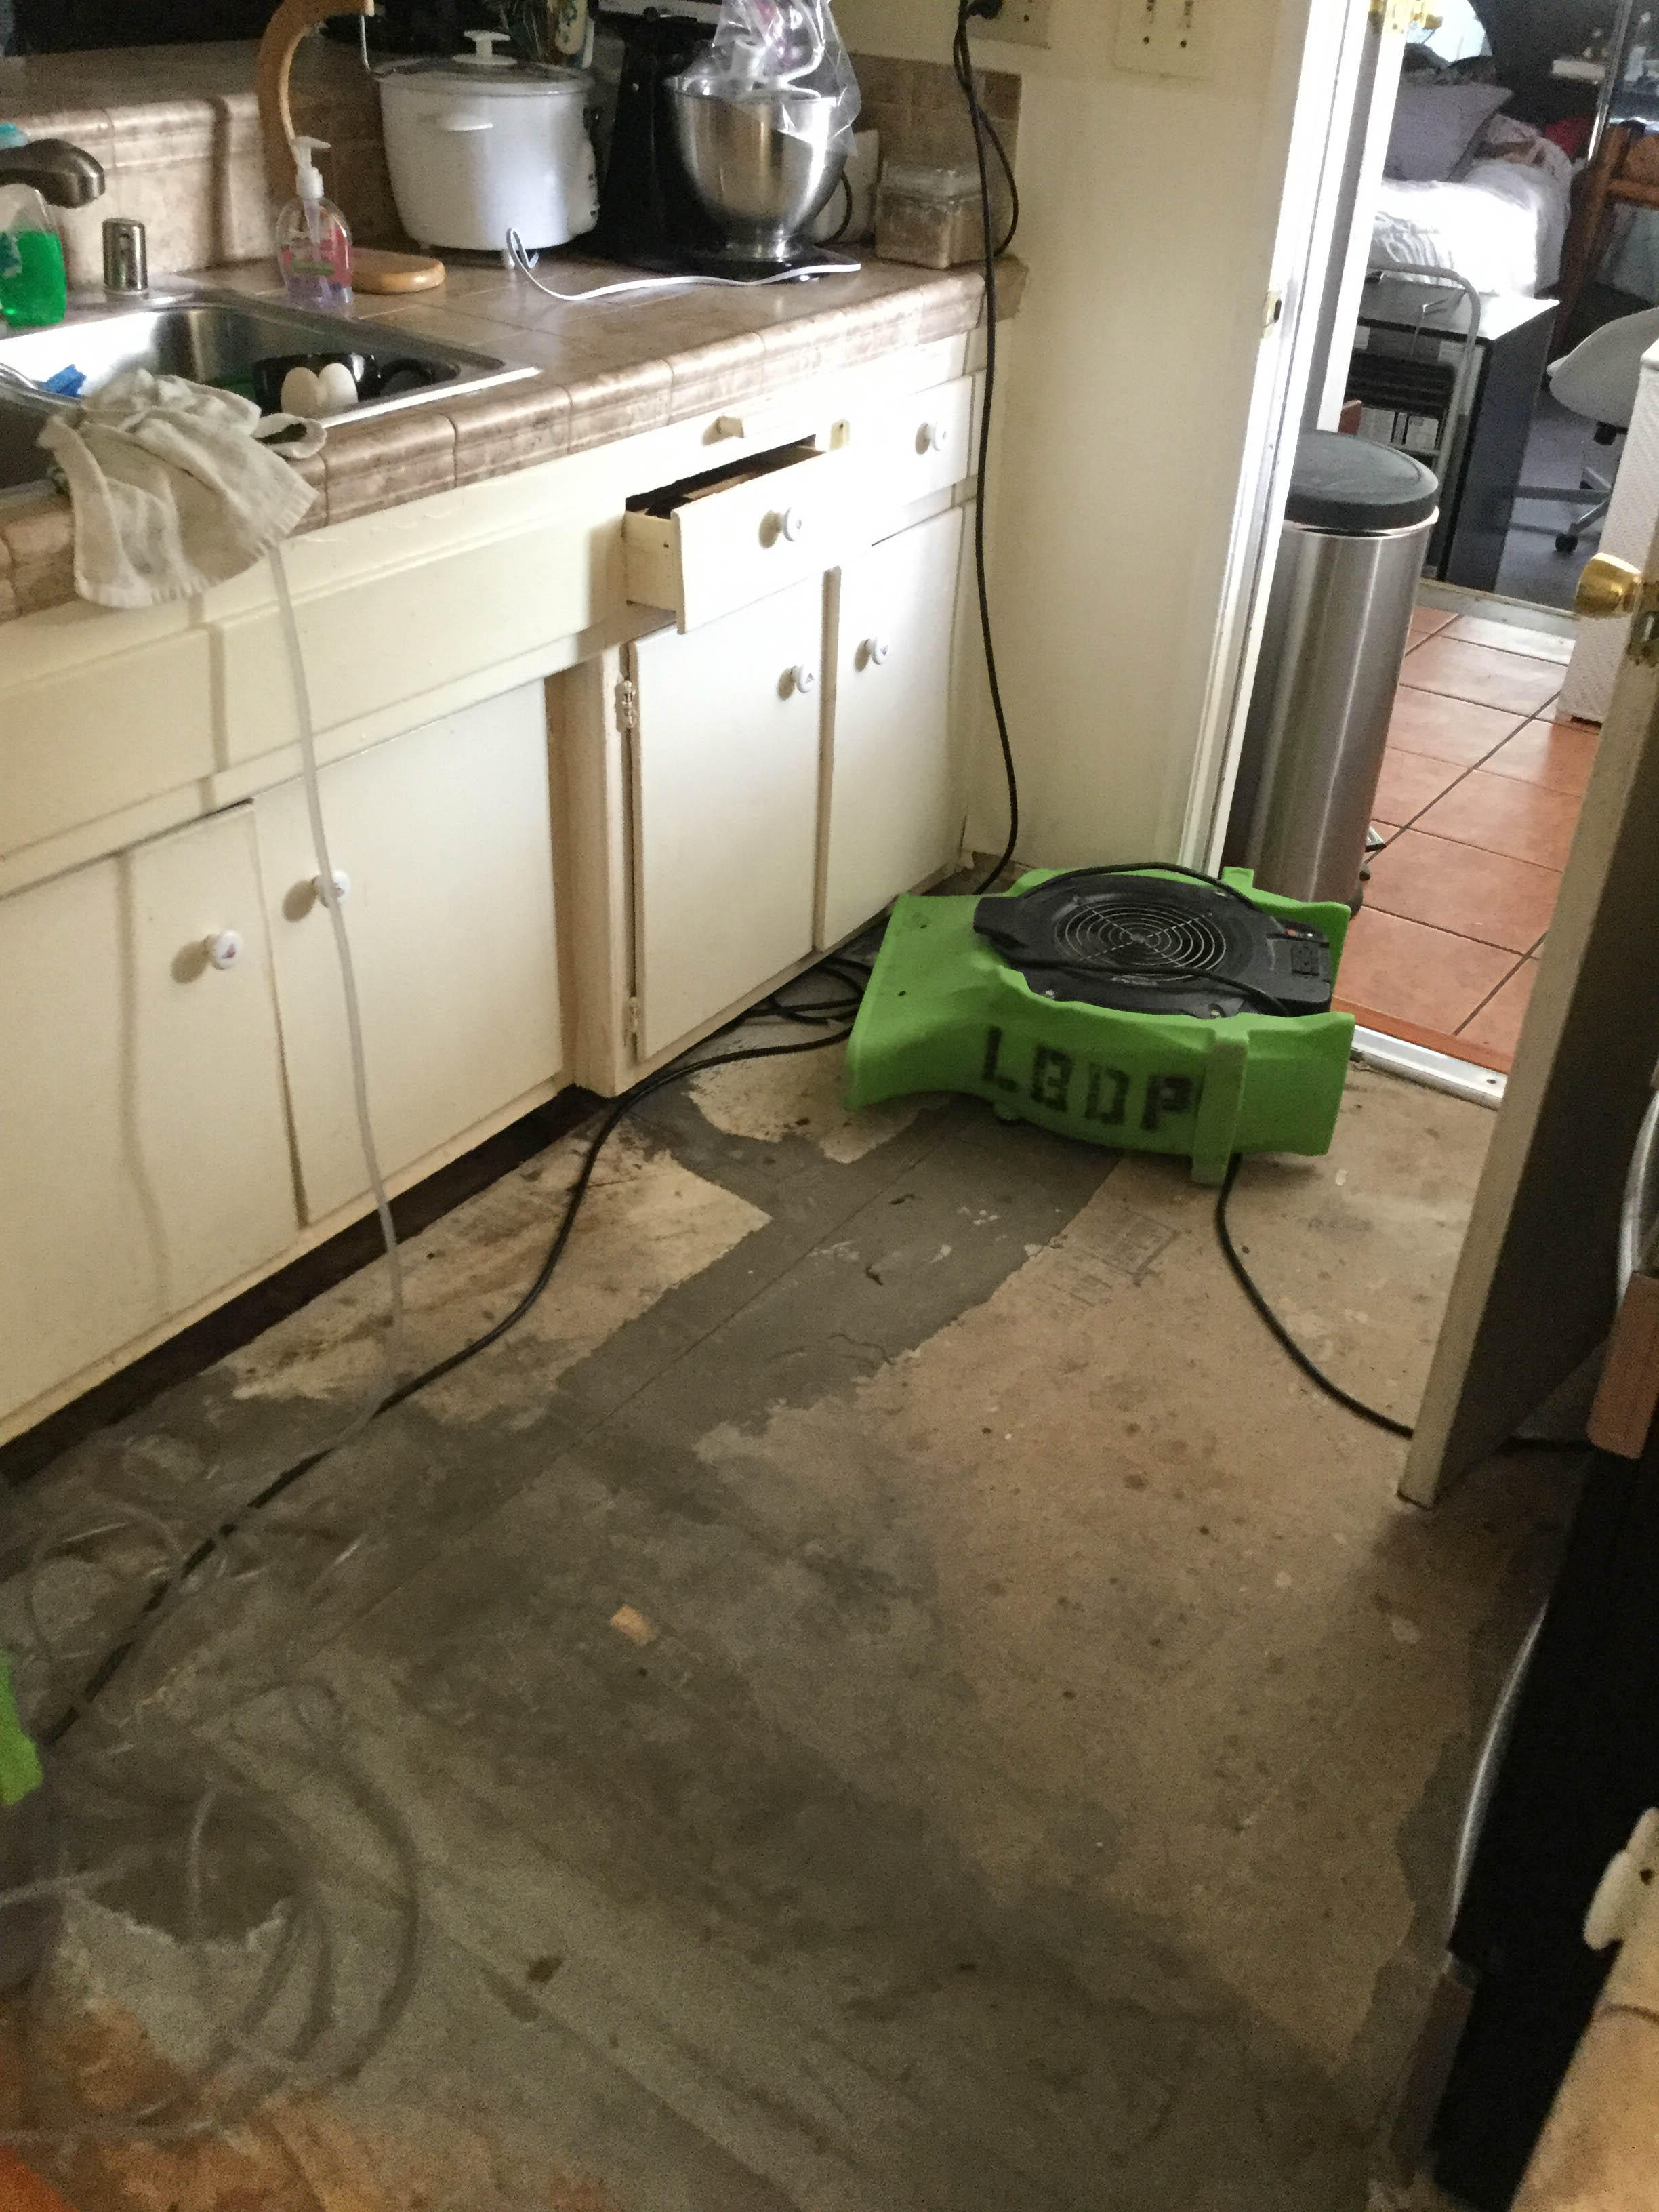 If you have a water loss like this, call SERVPRO of Laguna Beach / Dana Point.